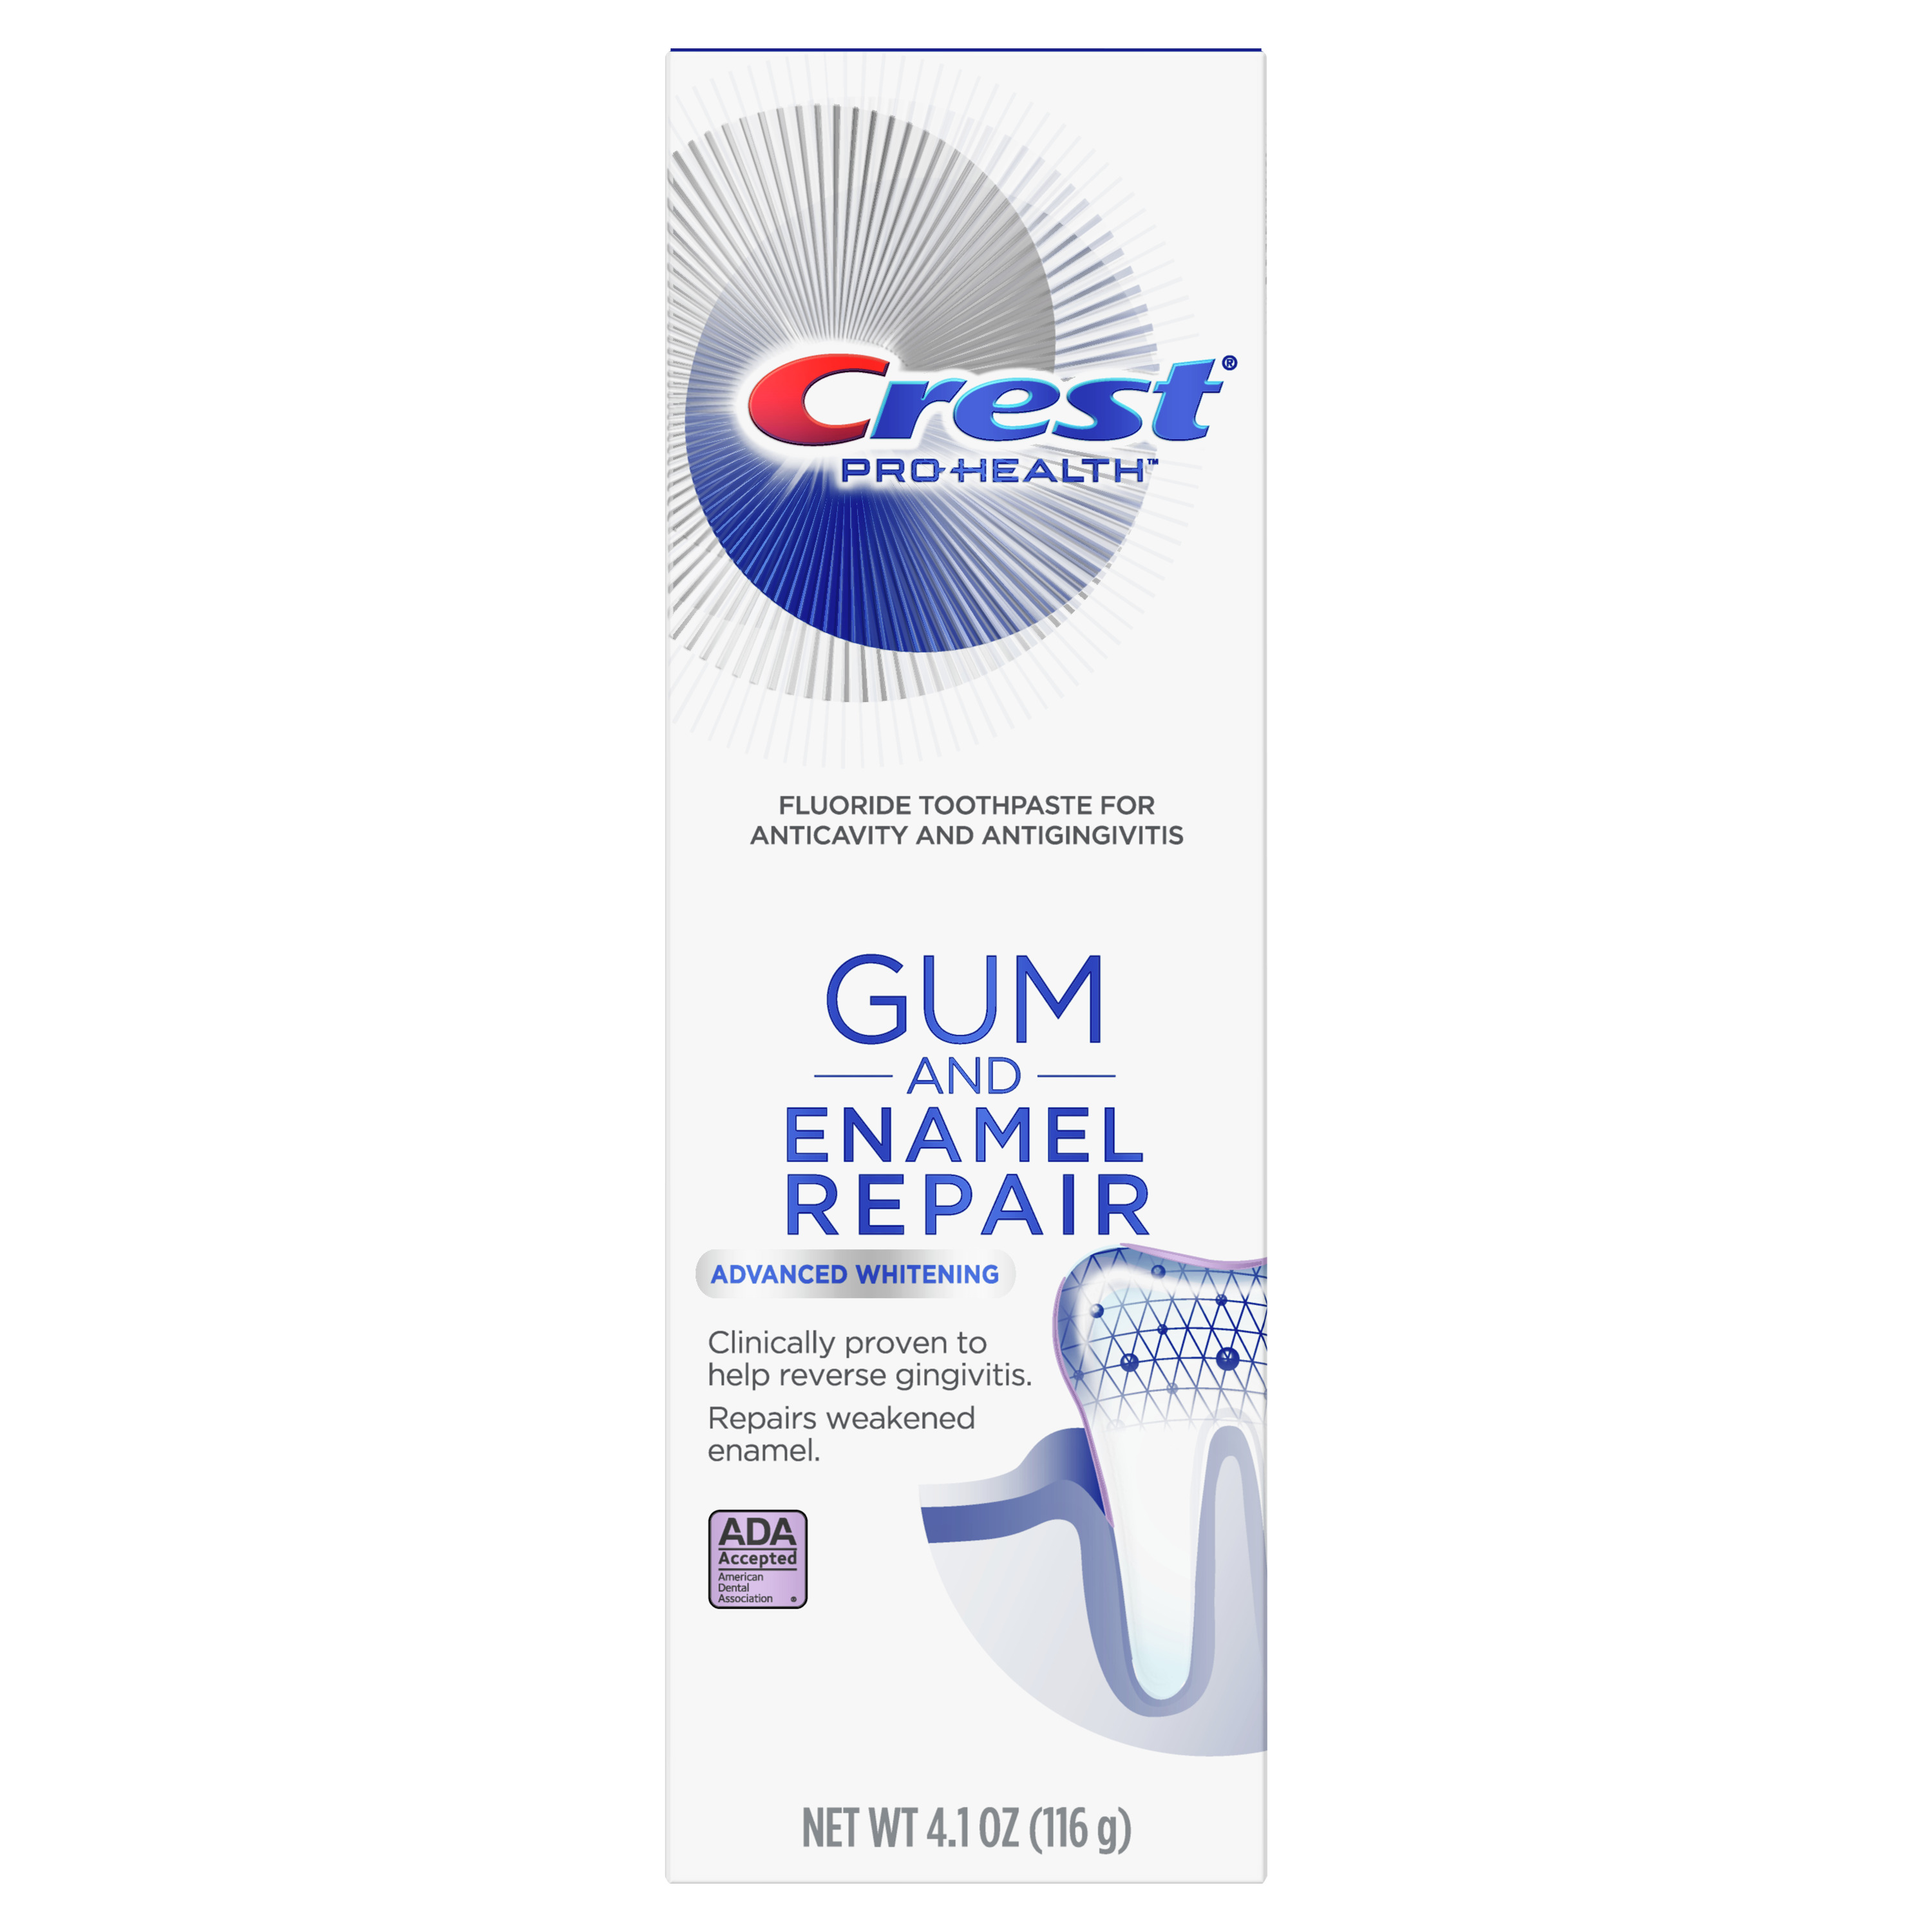 Crest Gum and Enamel Repair Toothpaste, Advanced Whitening, 4.1 oz - image 1 of 8